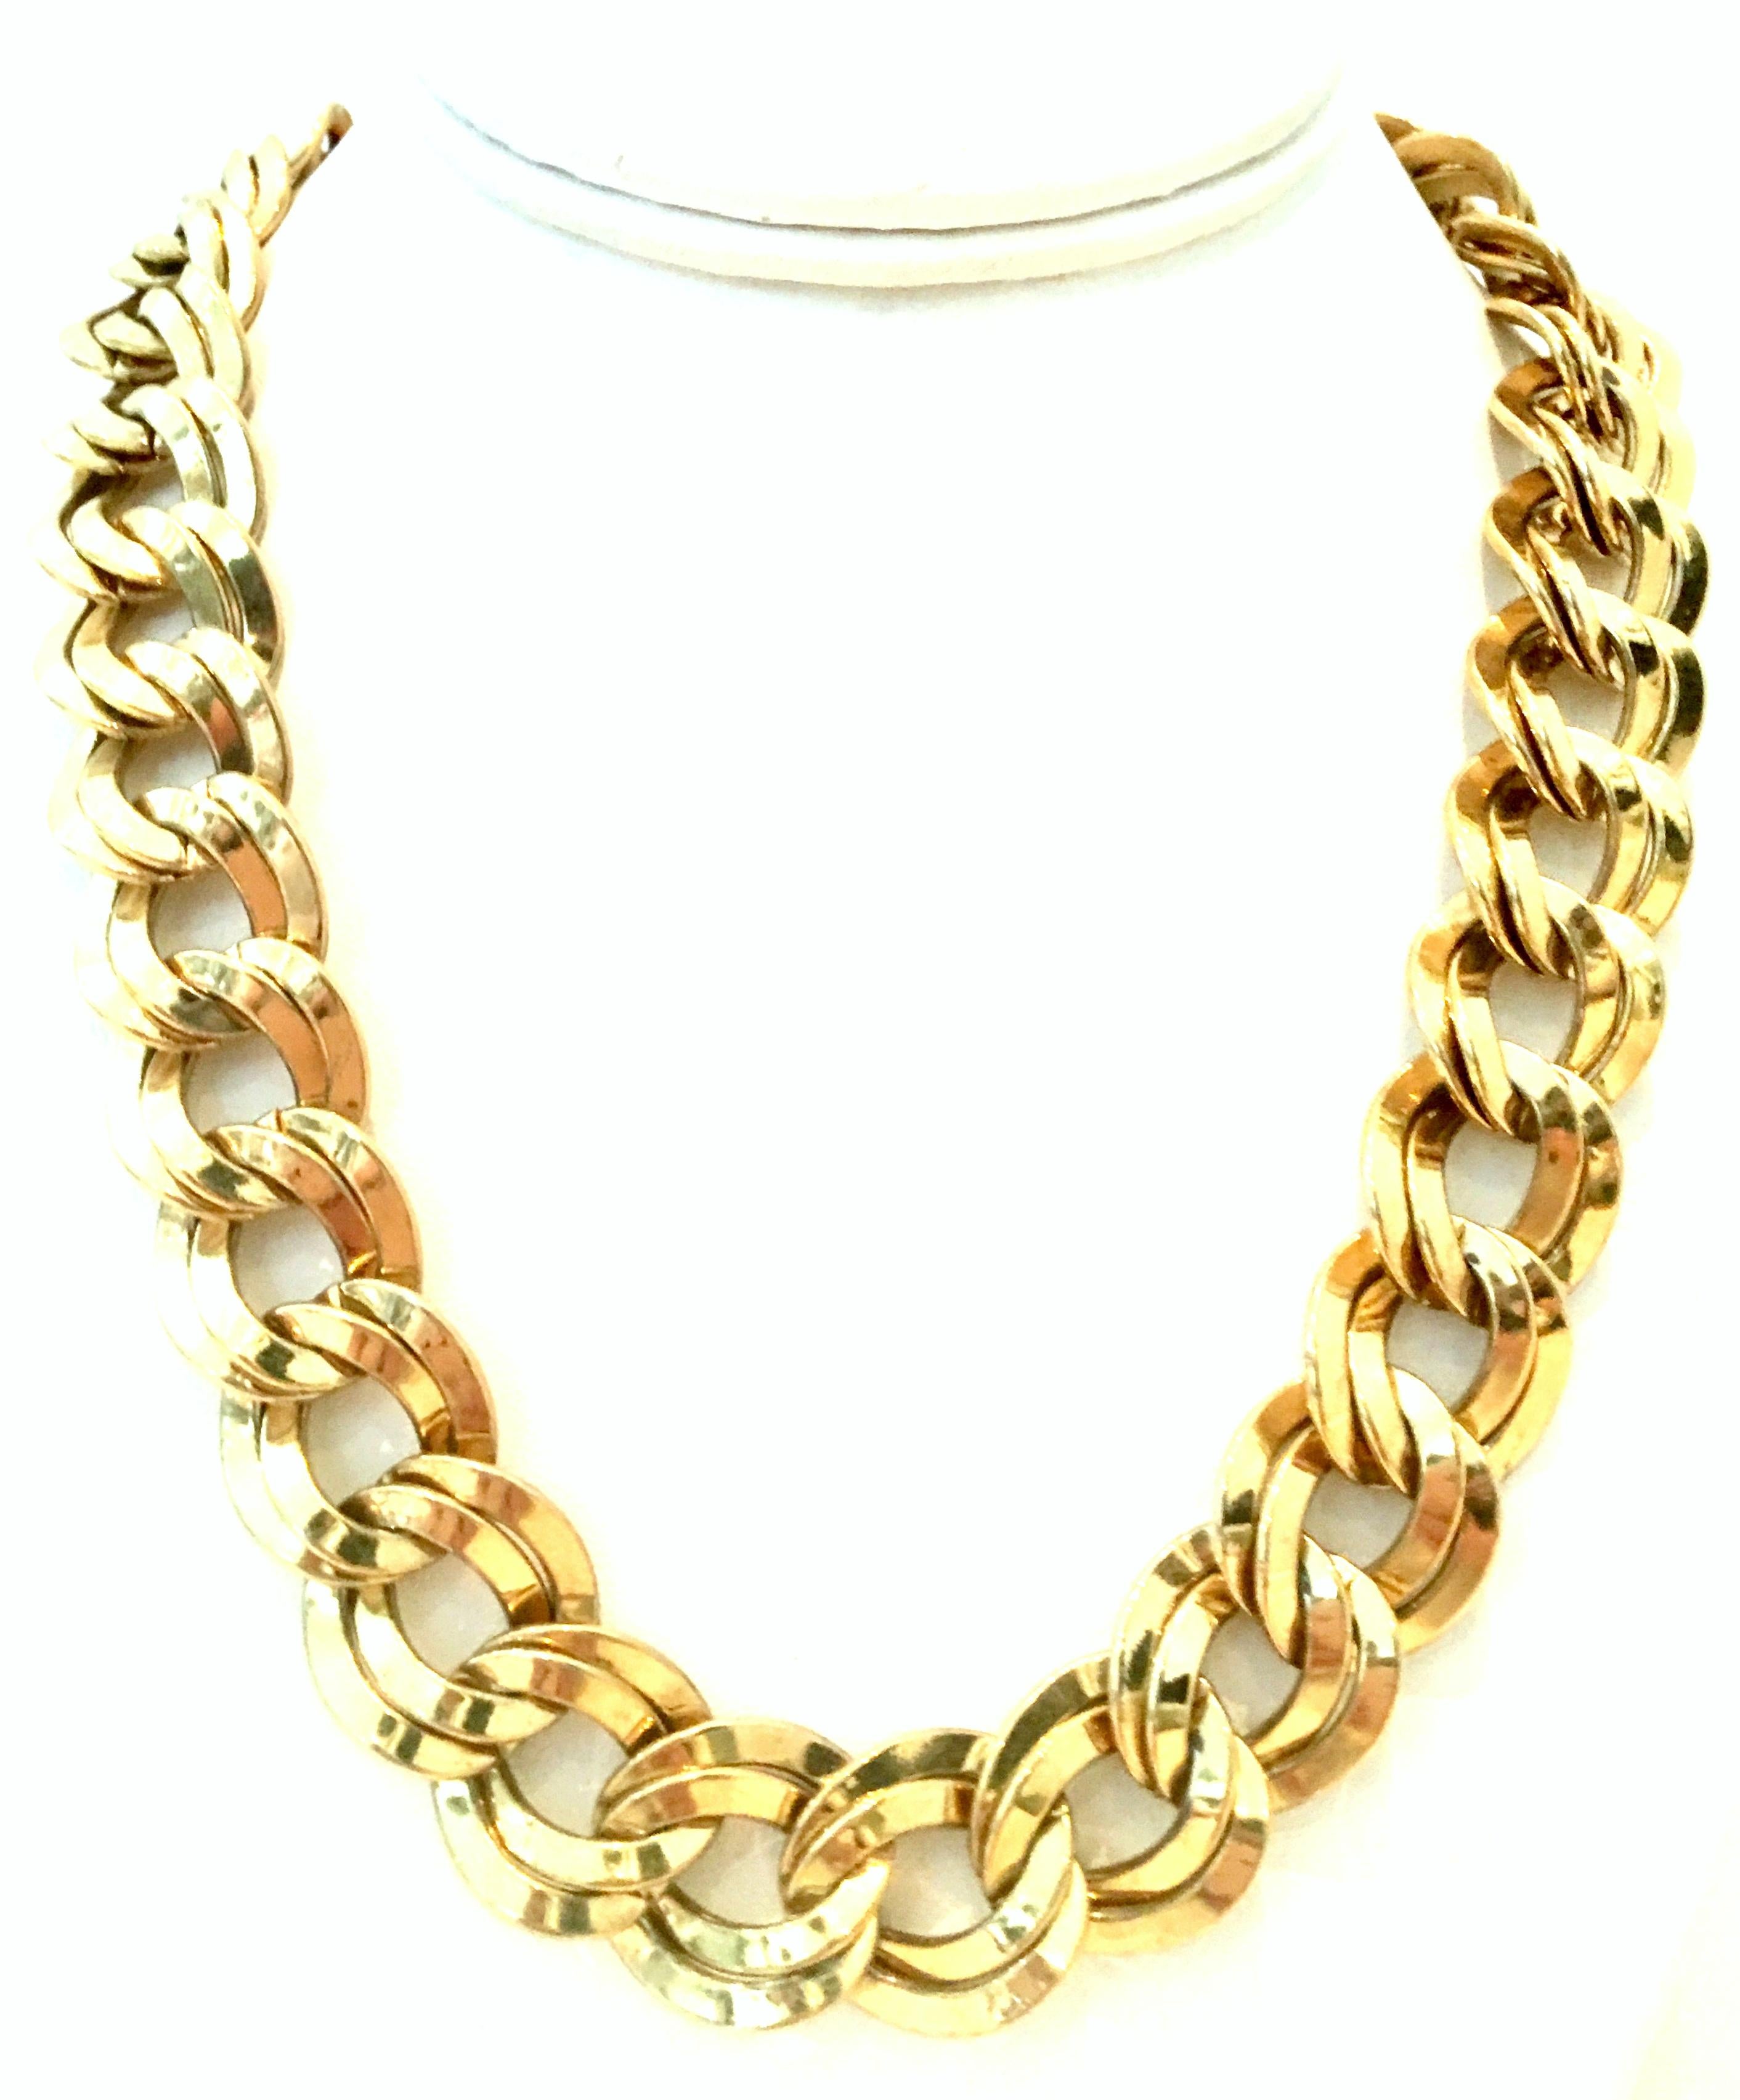 20th Century Gold Plate Double Chain Link Necklace By, Monet.
Features a gold plate double chain link design, with adjustable hook style clasp.
Signed on the clasp, Monet.